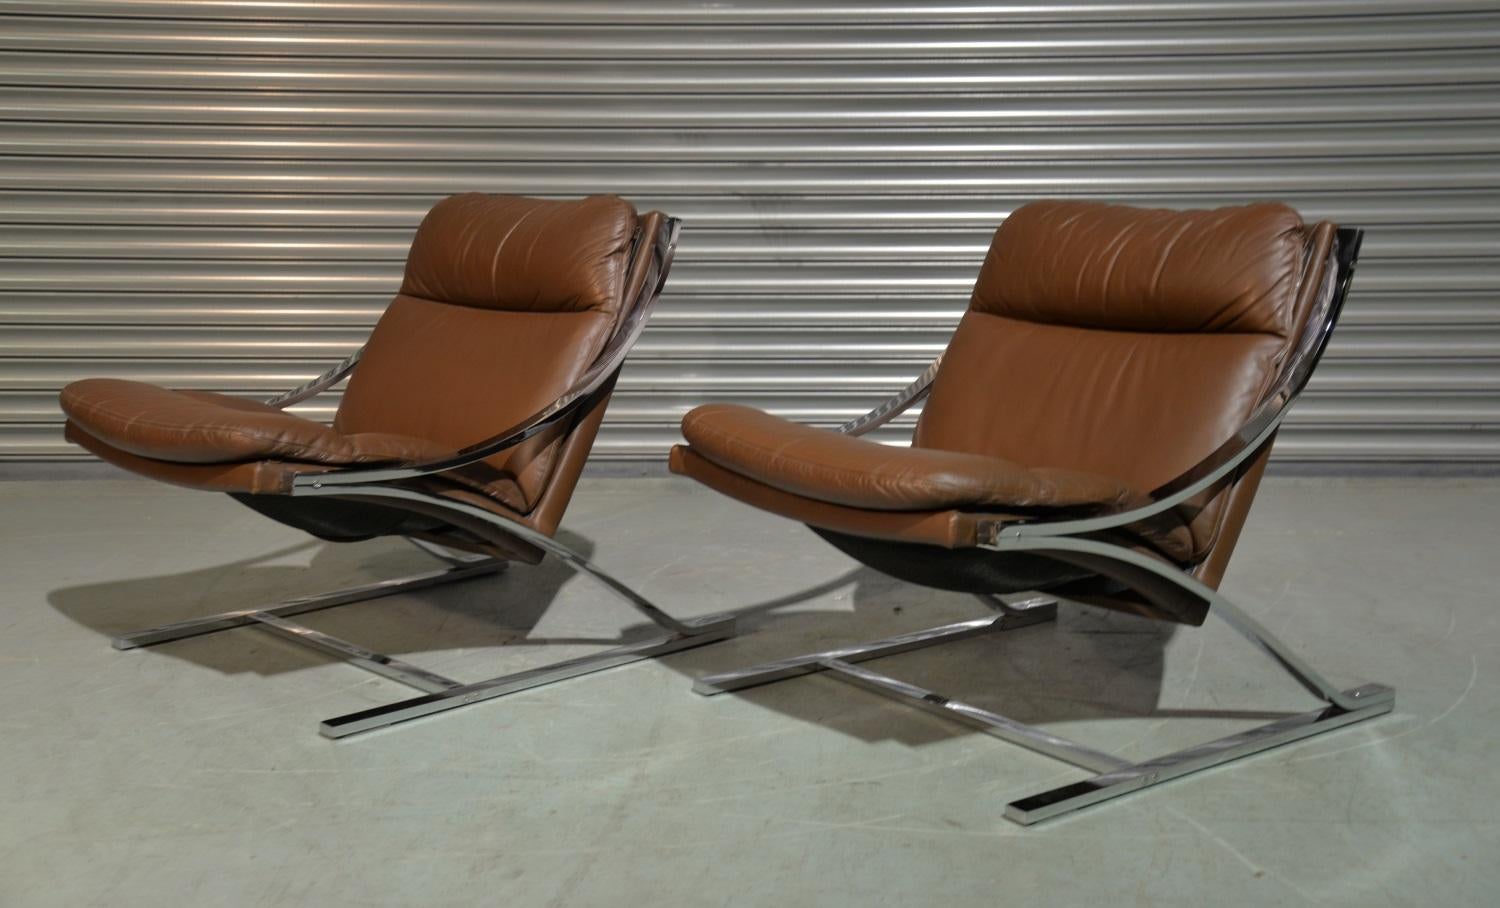 Discounted airfreight for our US and International customers (from 2 weeks door to door)

We are delighted to bring to you an iconic pair of  'Zeta' armchairs by designer Paul Tuttle for Strassle International of Switzerland. The name `Zeta`